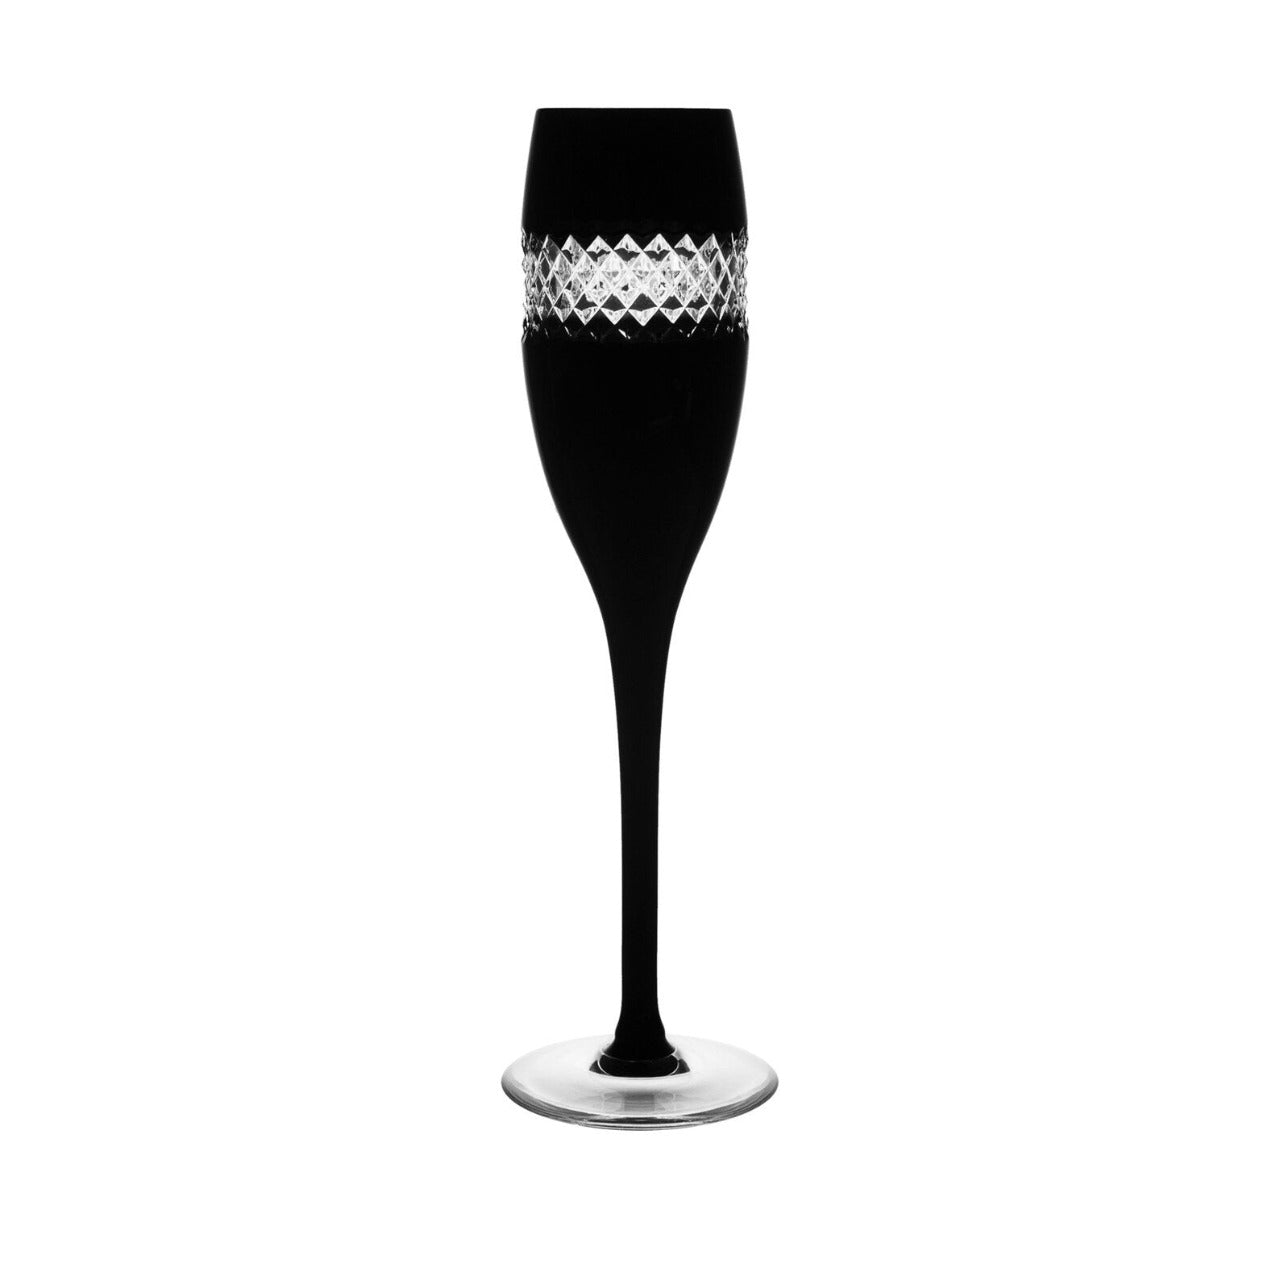 Waterford John Rocha Black Cut Champagne Flute (Single)  Each Black Cut Champagne Flute features a striking black glass finish ensuring they immediately stand out from all other tableware. To top off the slick, dark aesthetic, these designer champagne flutes are contrasted with a diamond design cut glass band running around the bowl.